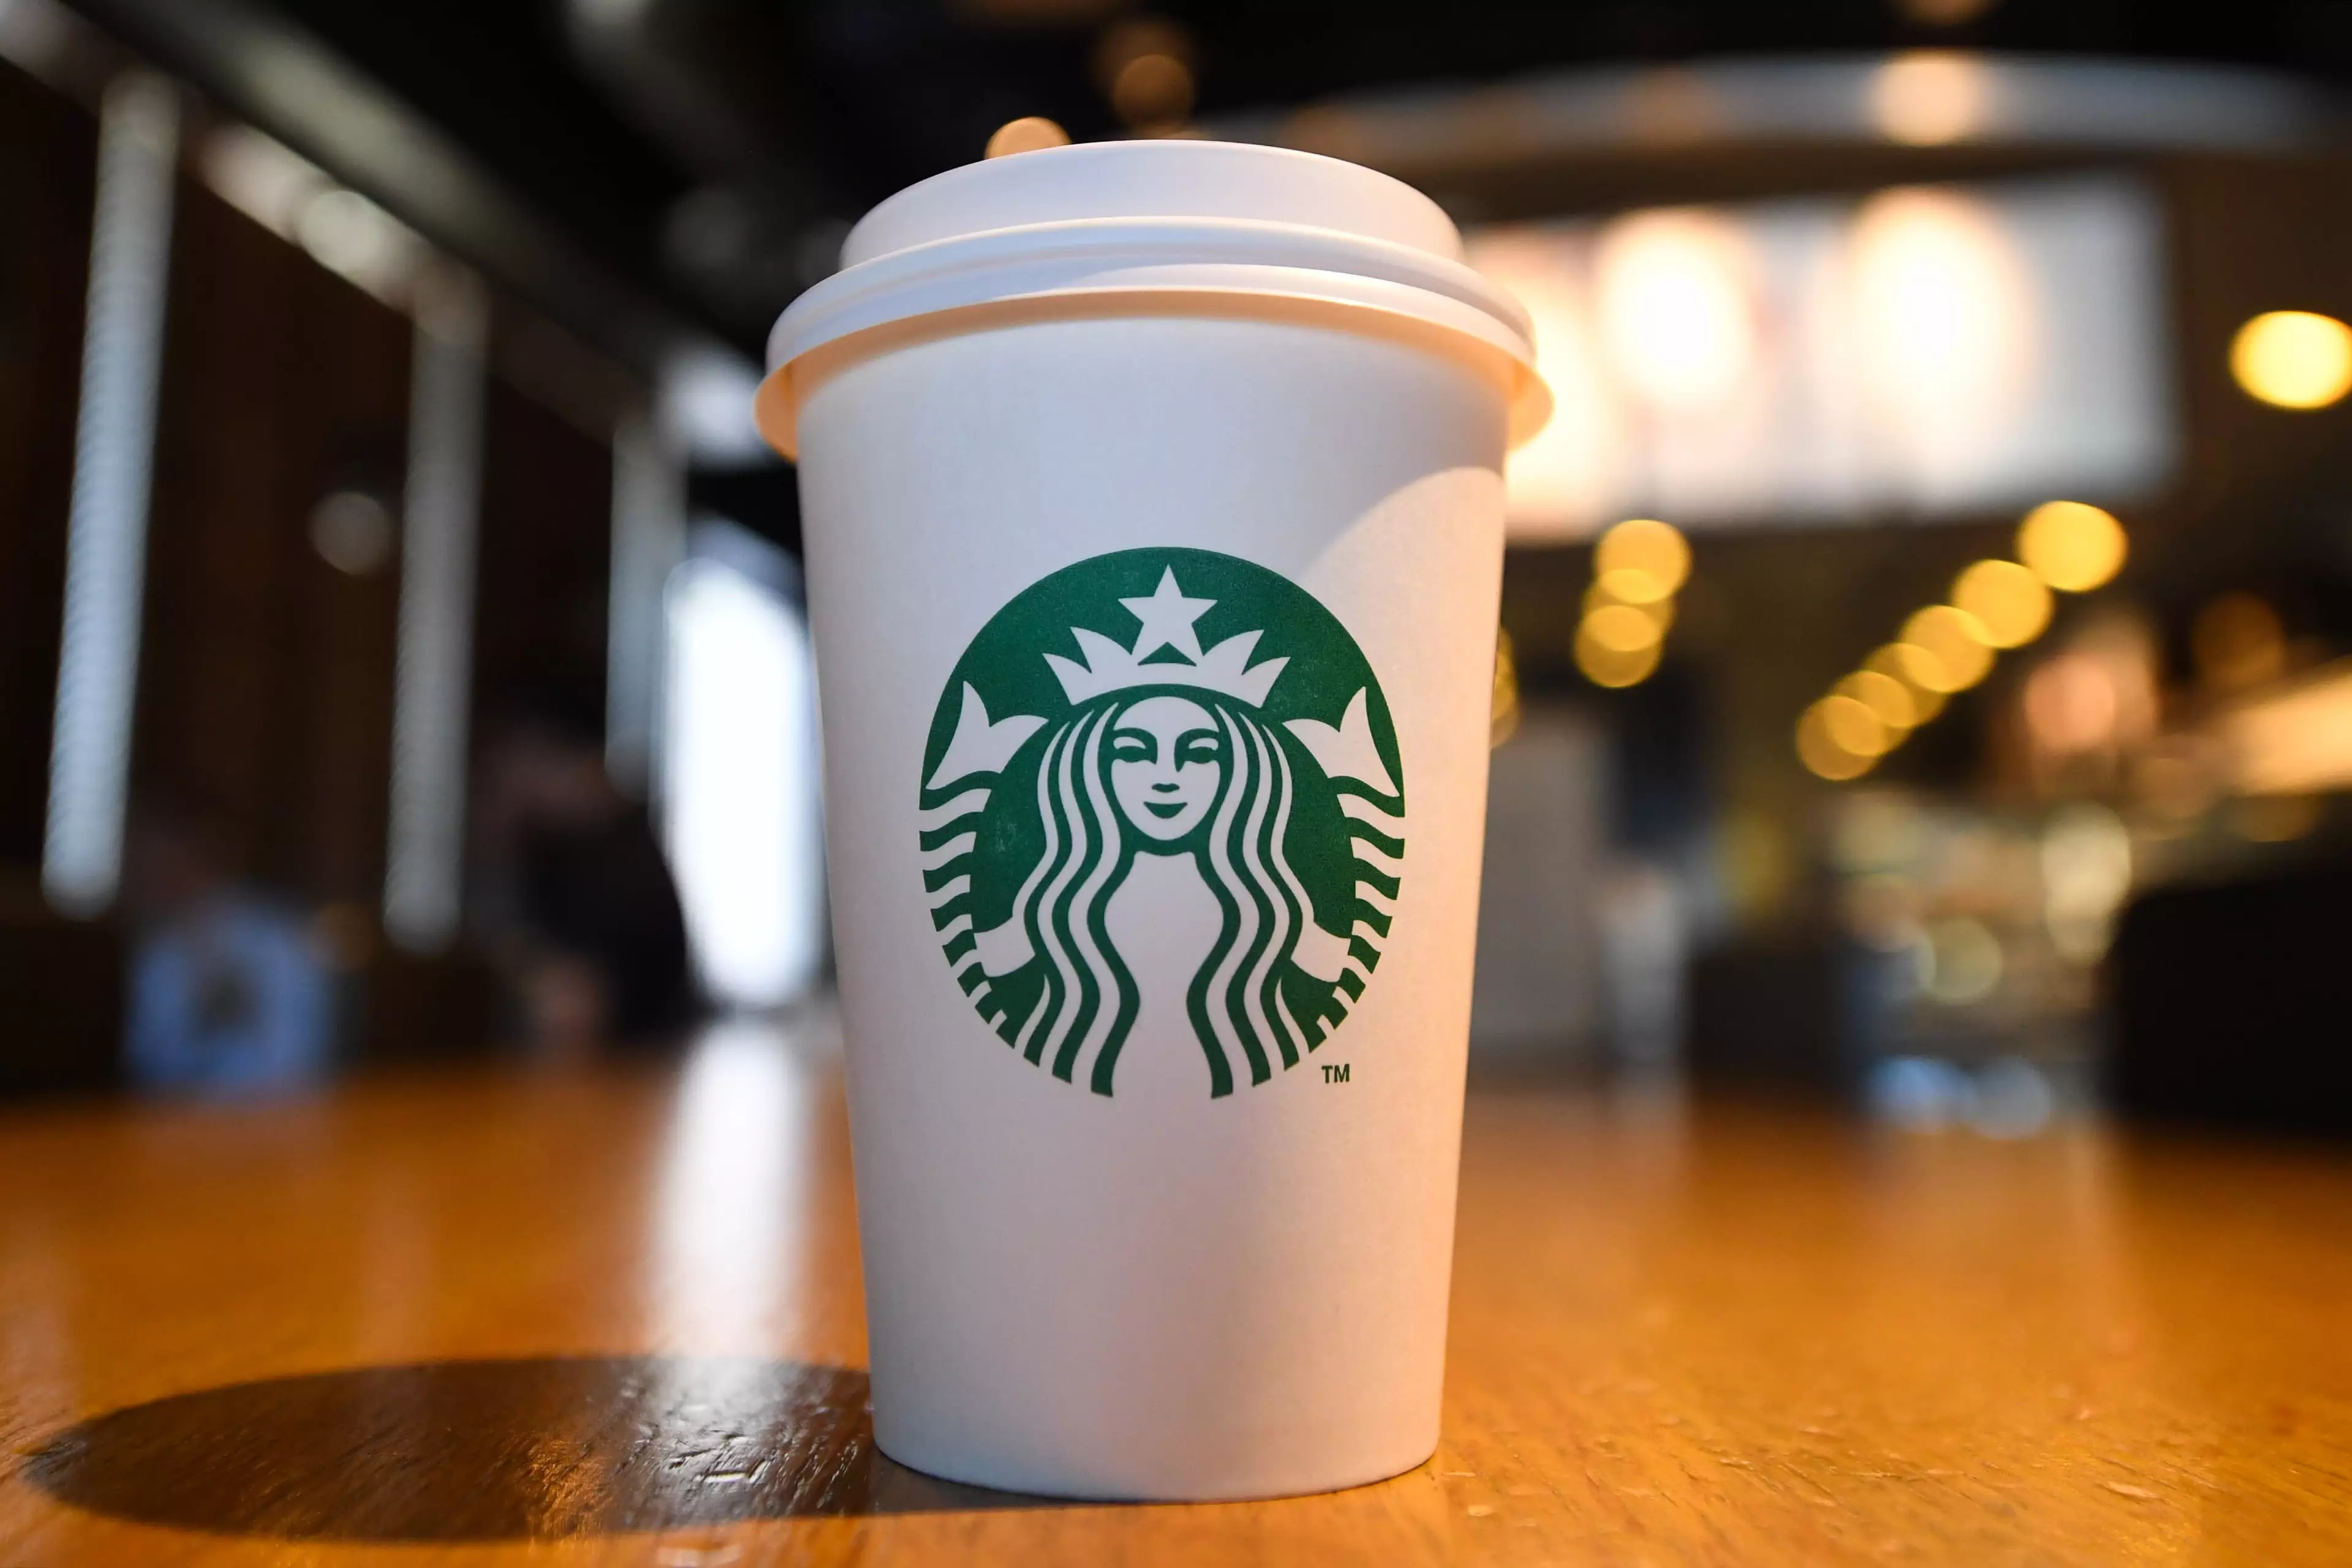 Starbucks is offering free coffee to NHS staff and rail workers.